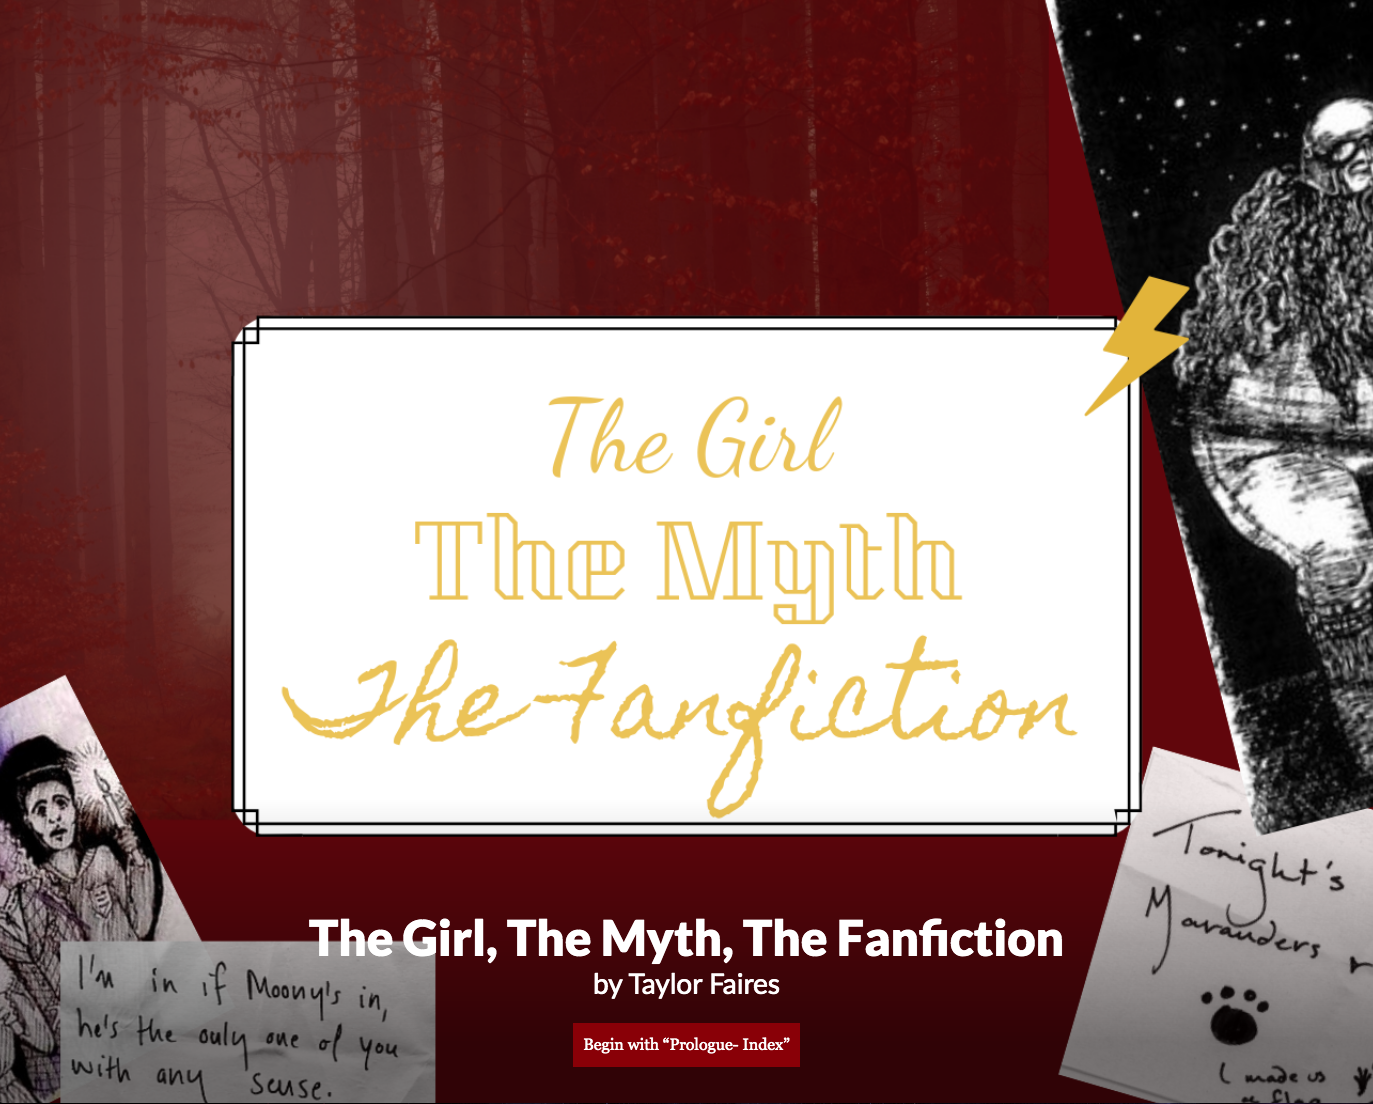 The Girl, The Myth, The Fanfiction